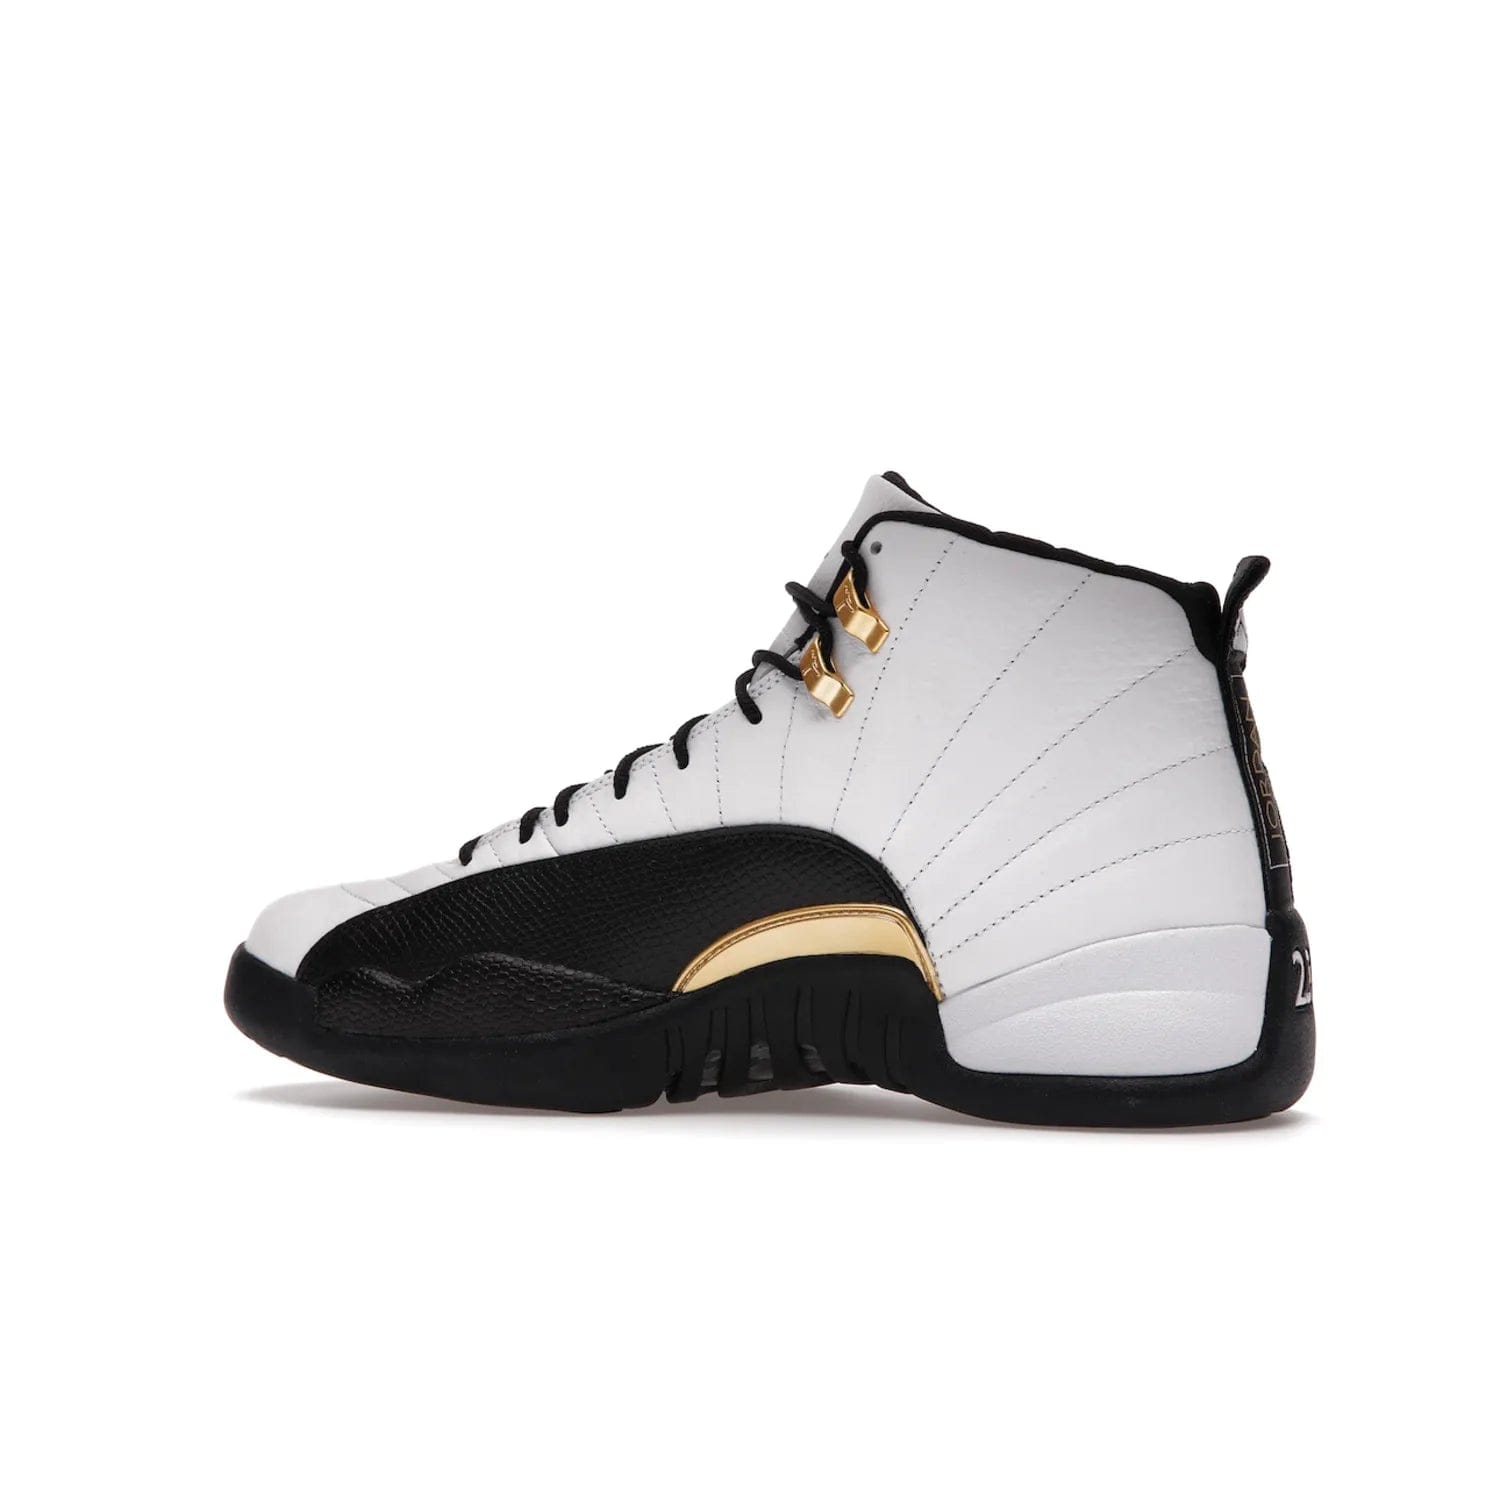 Jordan 12 Retro Royalty Taxi - Image 21 - Only at www.BallersClubKickz.com - Make a statement with the Air Jordan 12 Retro Royalty Taxi. Woven heel tag, gold plaquet, white tumbled leather upper plus a black toe wrap, make this modern take on the classic a must-have. Available in November 2021.